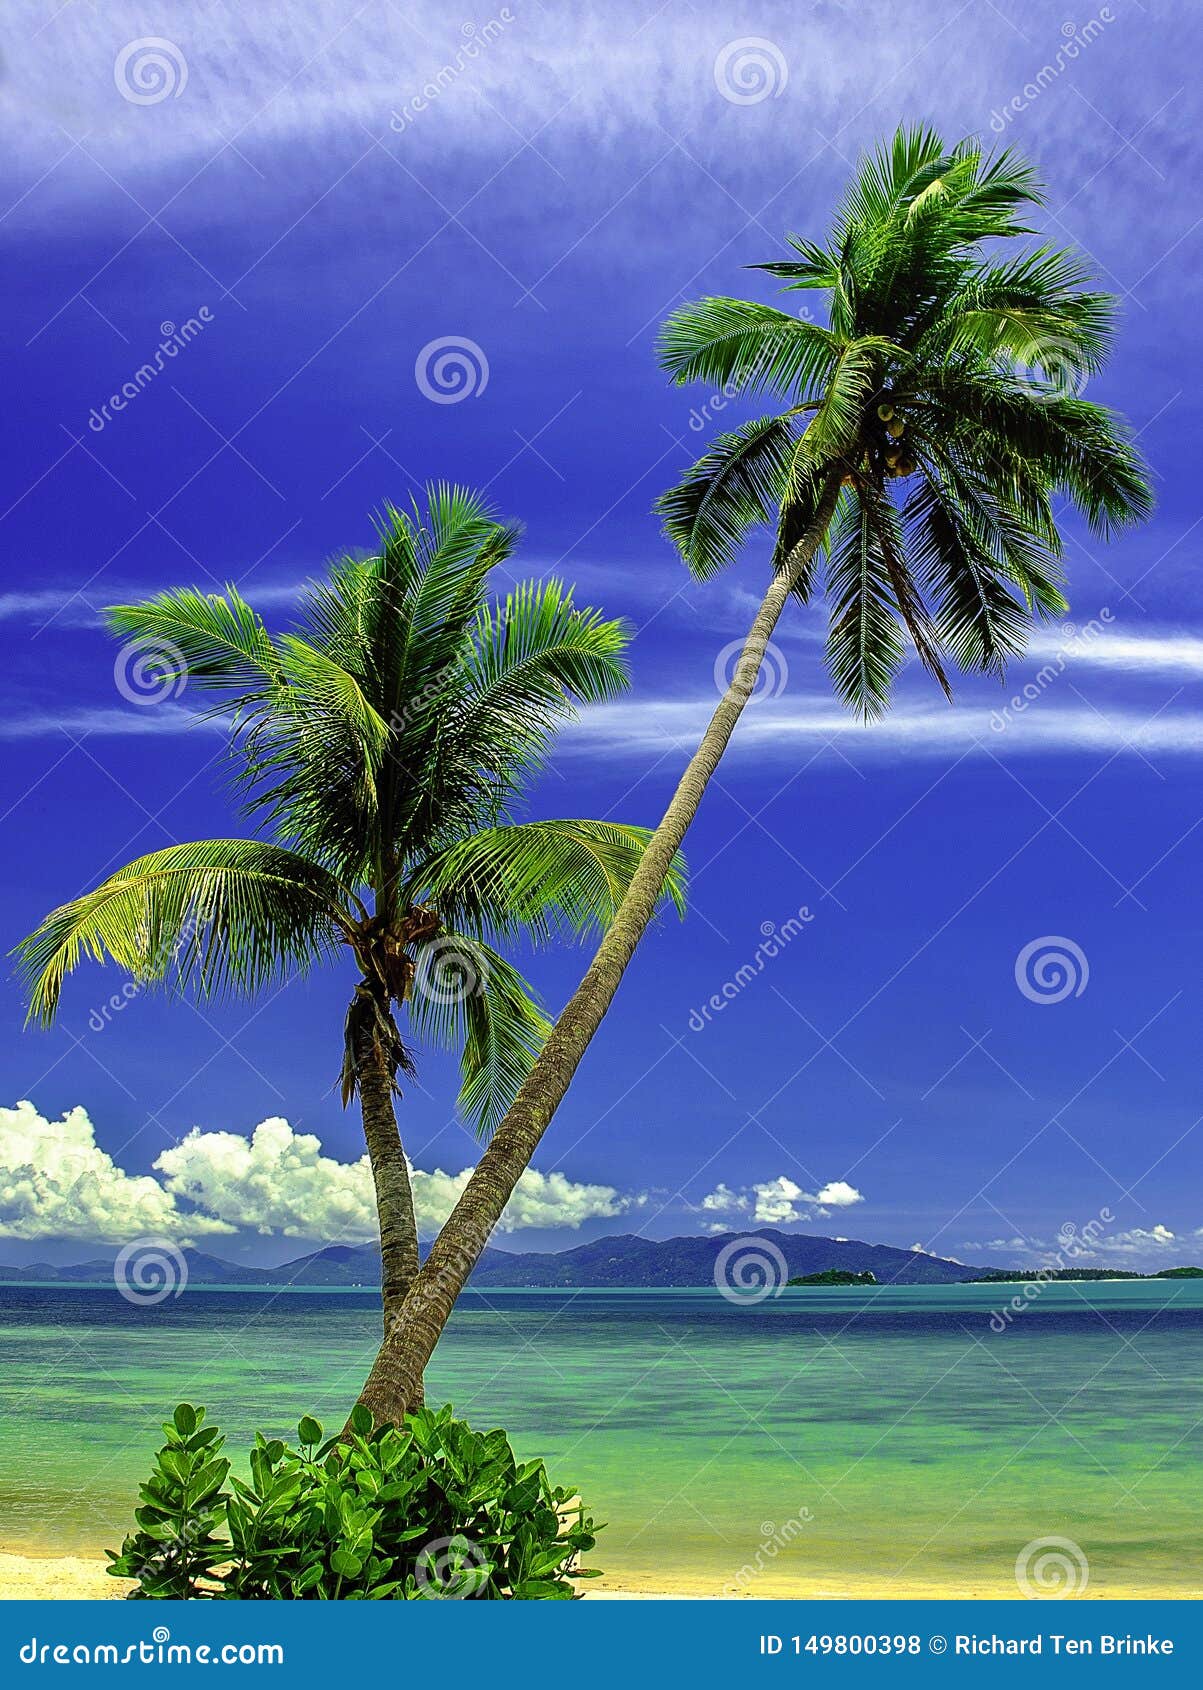 Coconut trees on the beach stock photo. Image of tropical - 149800398